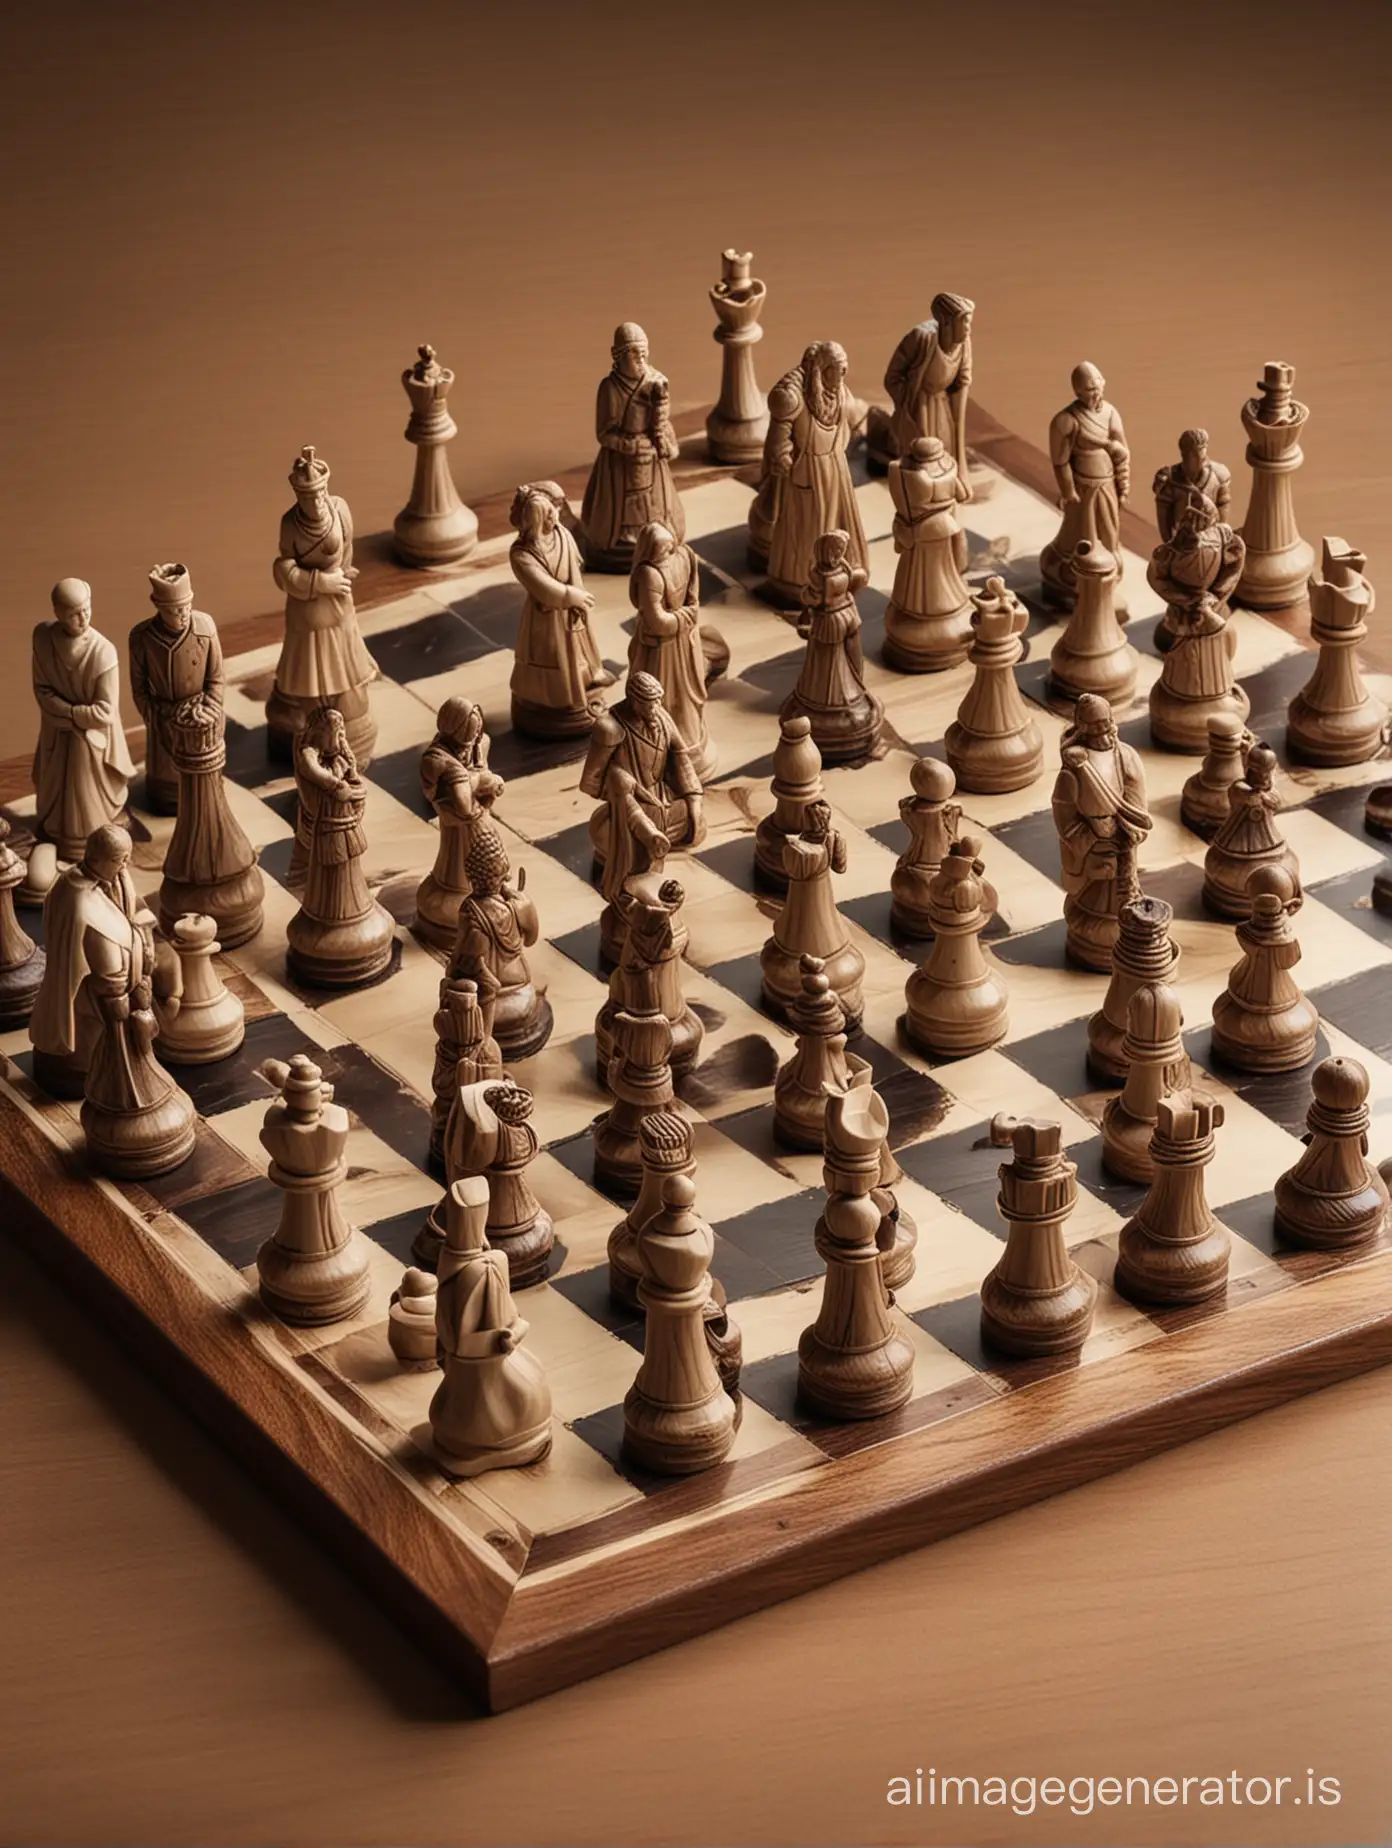 Living-Chess-Battle-Human-Chess-Pieces-Engage-in-Strategic-Combat